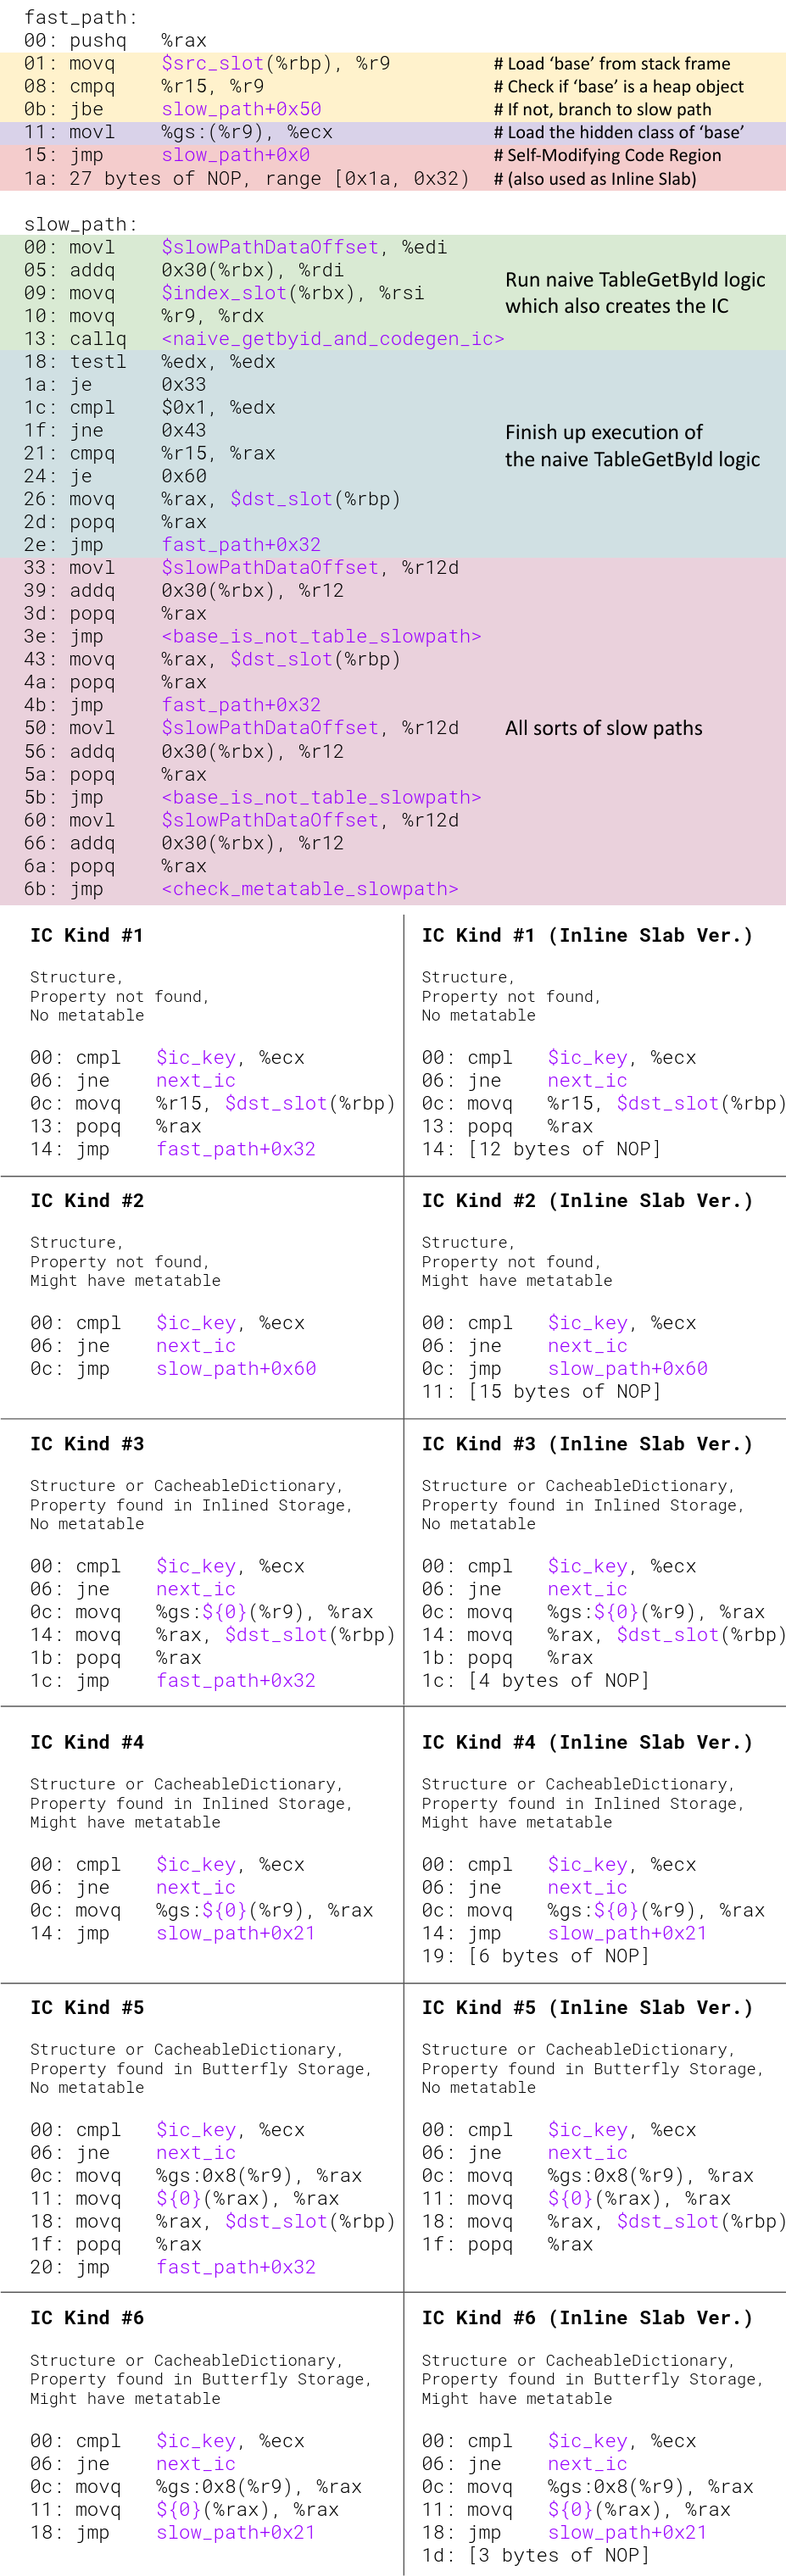 Disassembly of the main logic and all IC logic generated for the TableGetById bytecode